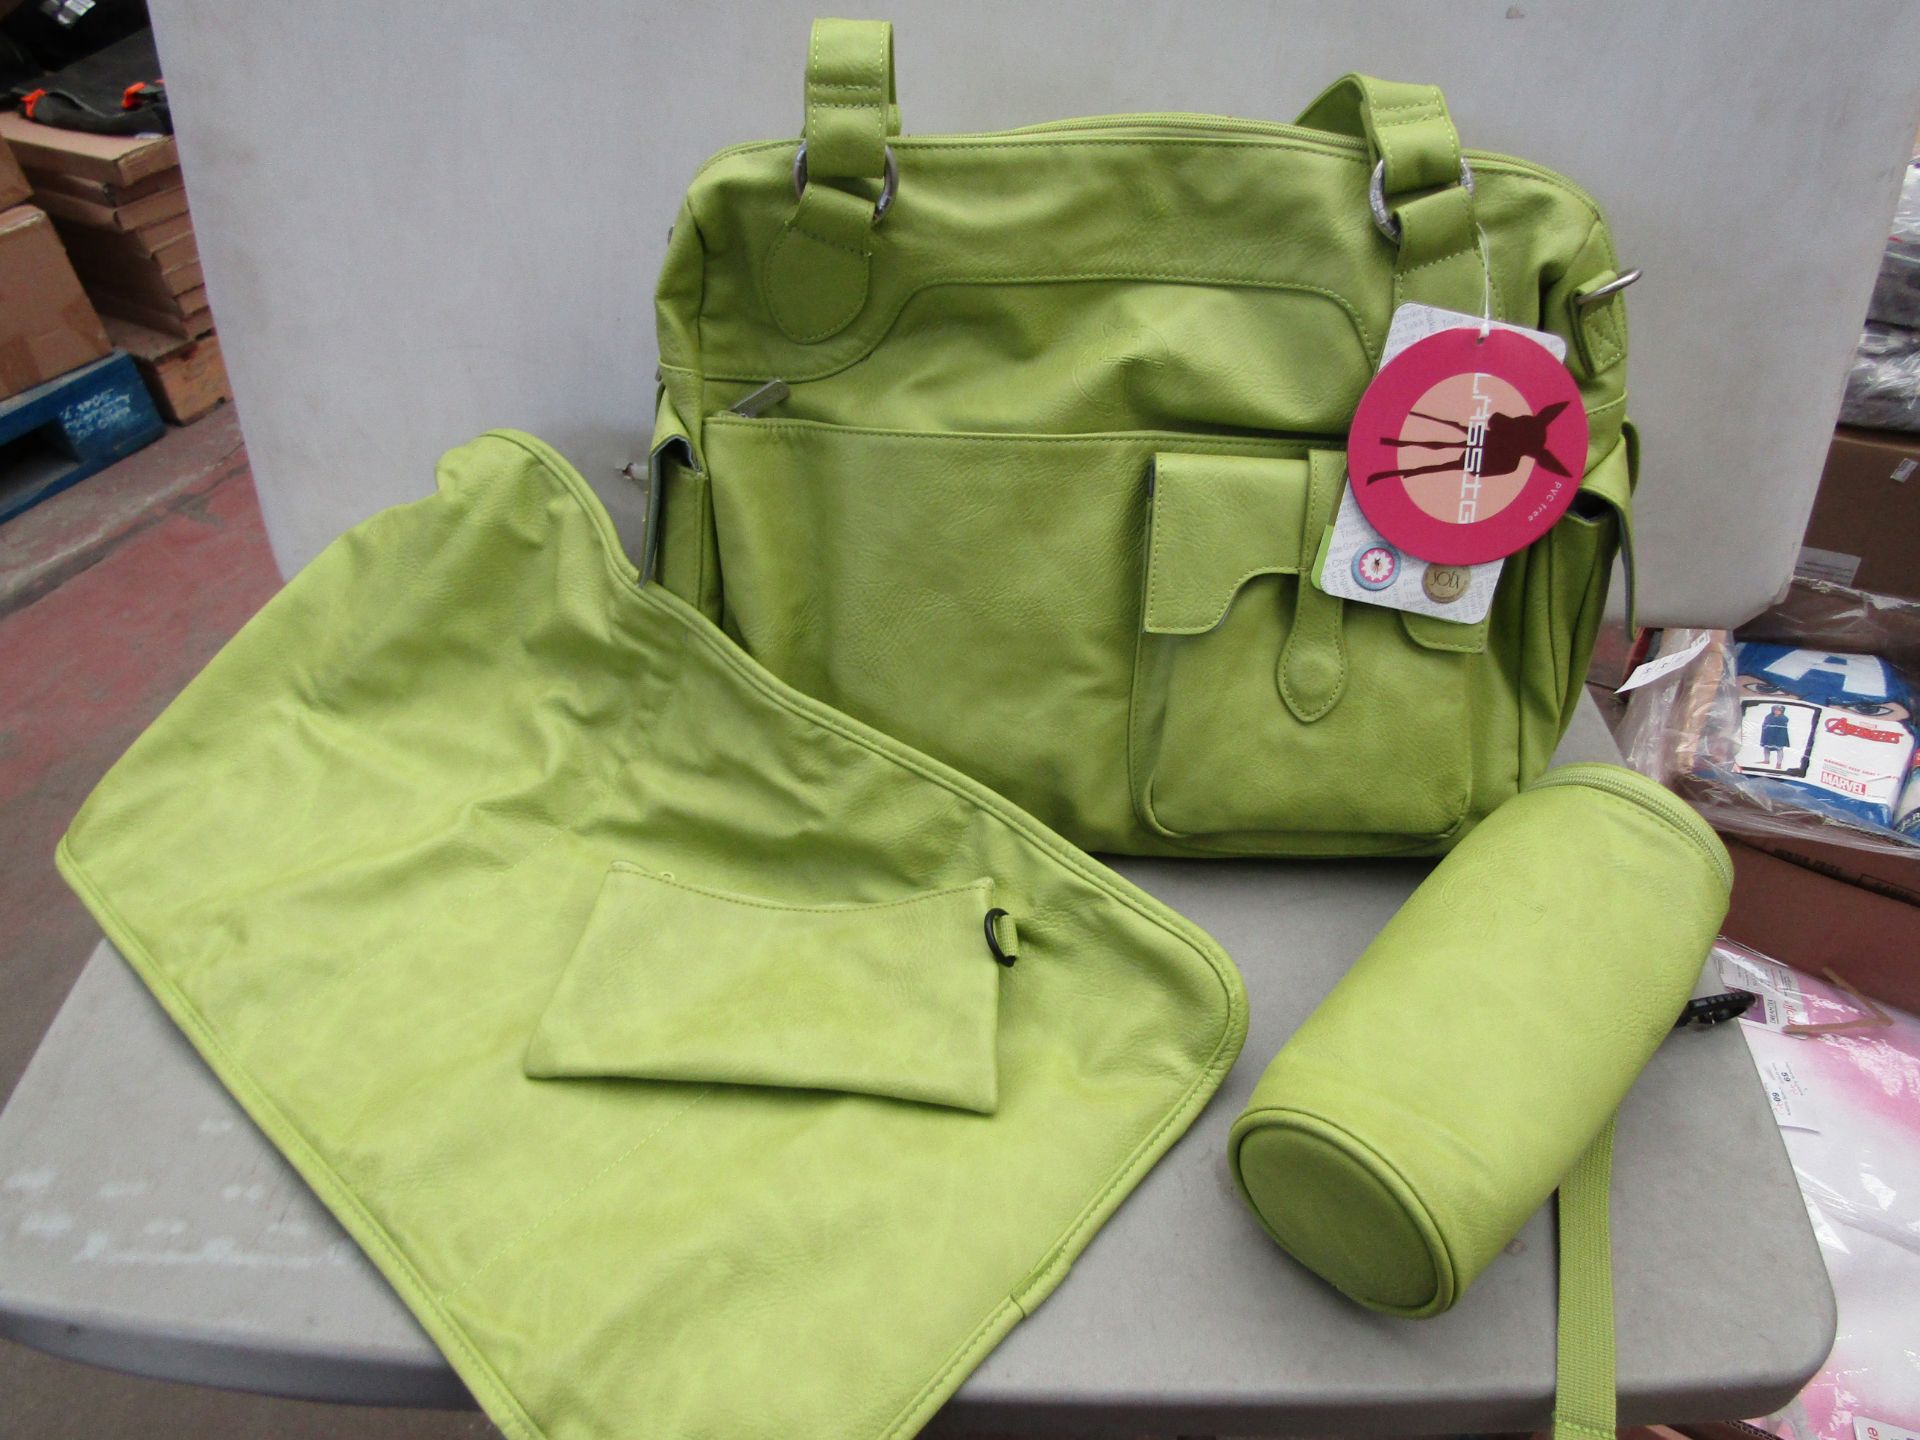 Lassig Casual Diaper Bag includes matching Insulated Bottle Holder, Changing Mat and Stroller Hooks,